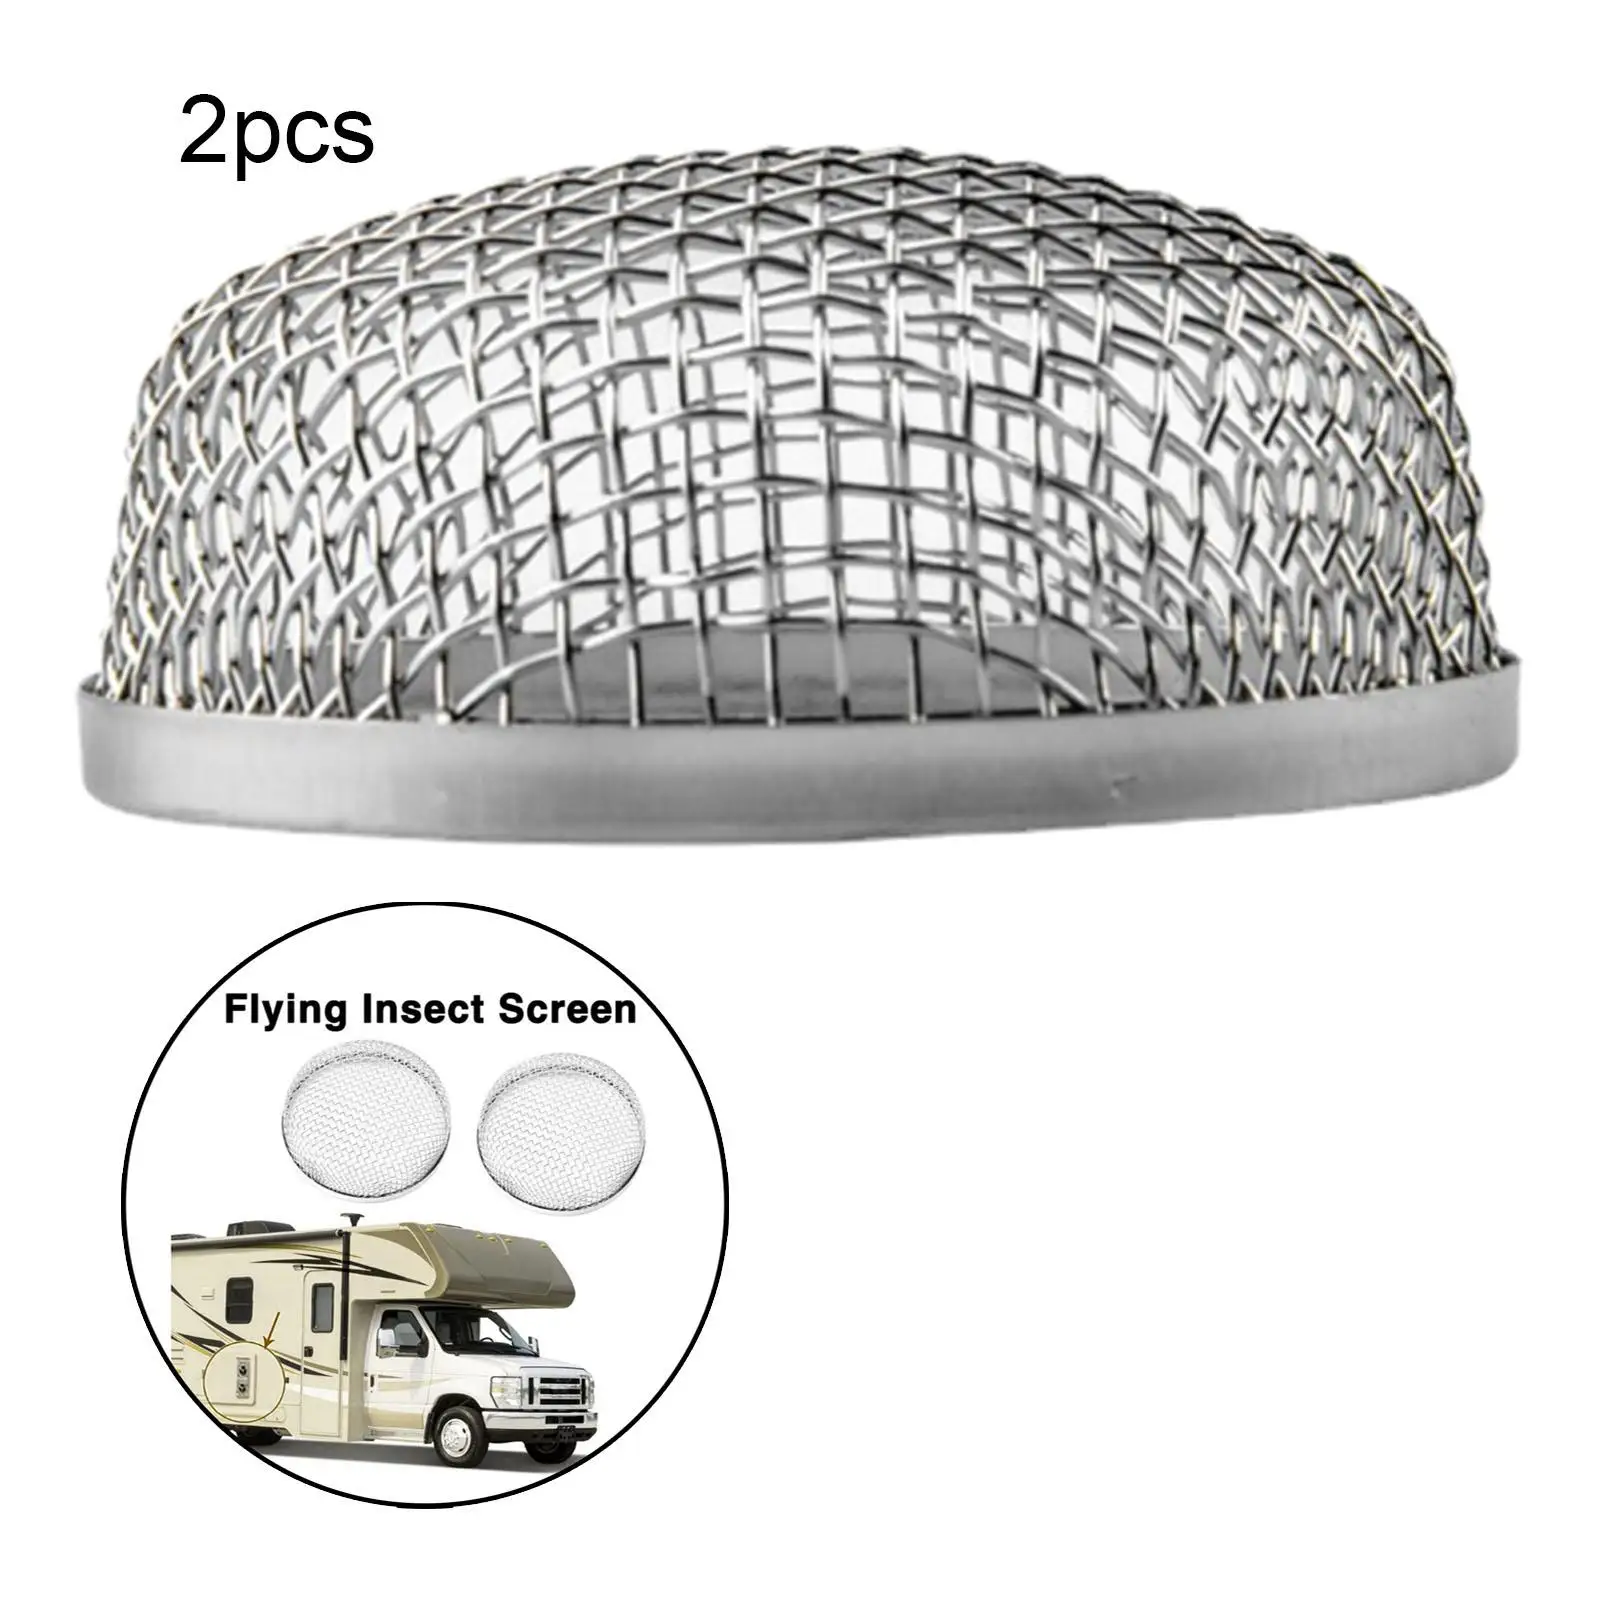 2 Pieces RV Furnace cover 2.8inch Stainless Steel Mesh Screens Heater Exhaust Vents